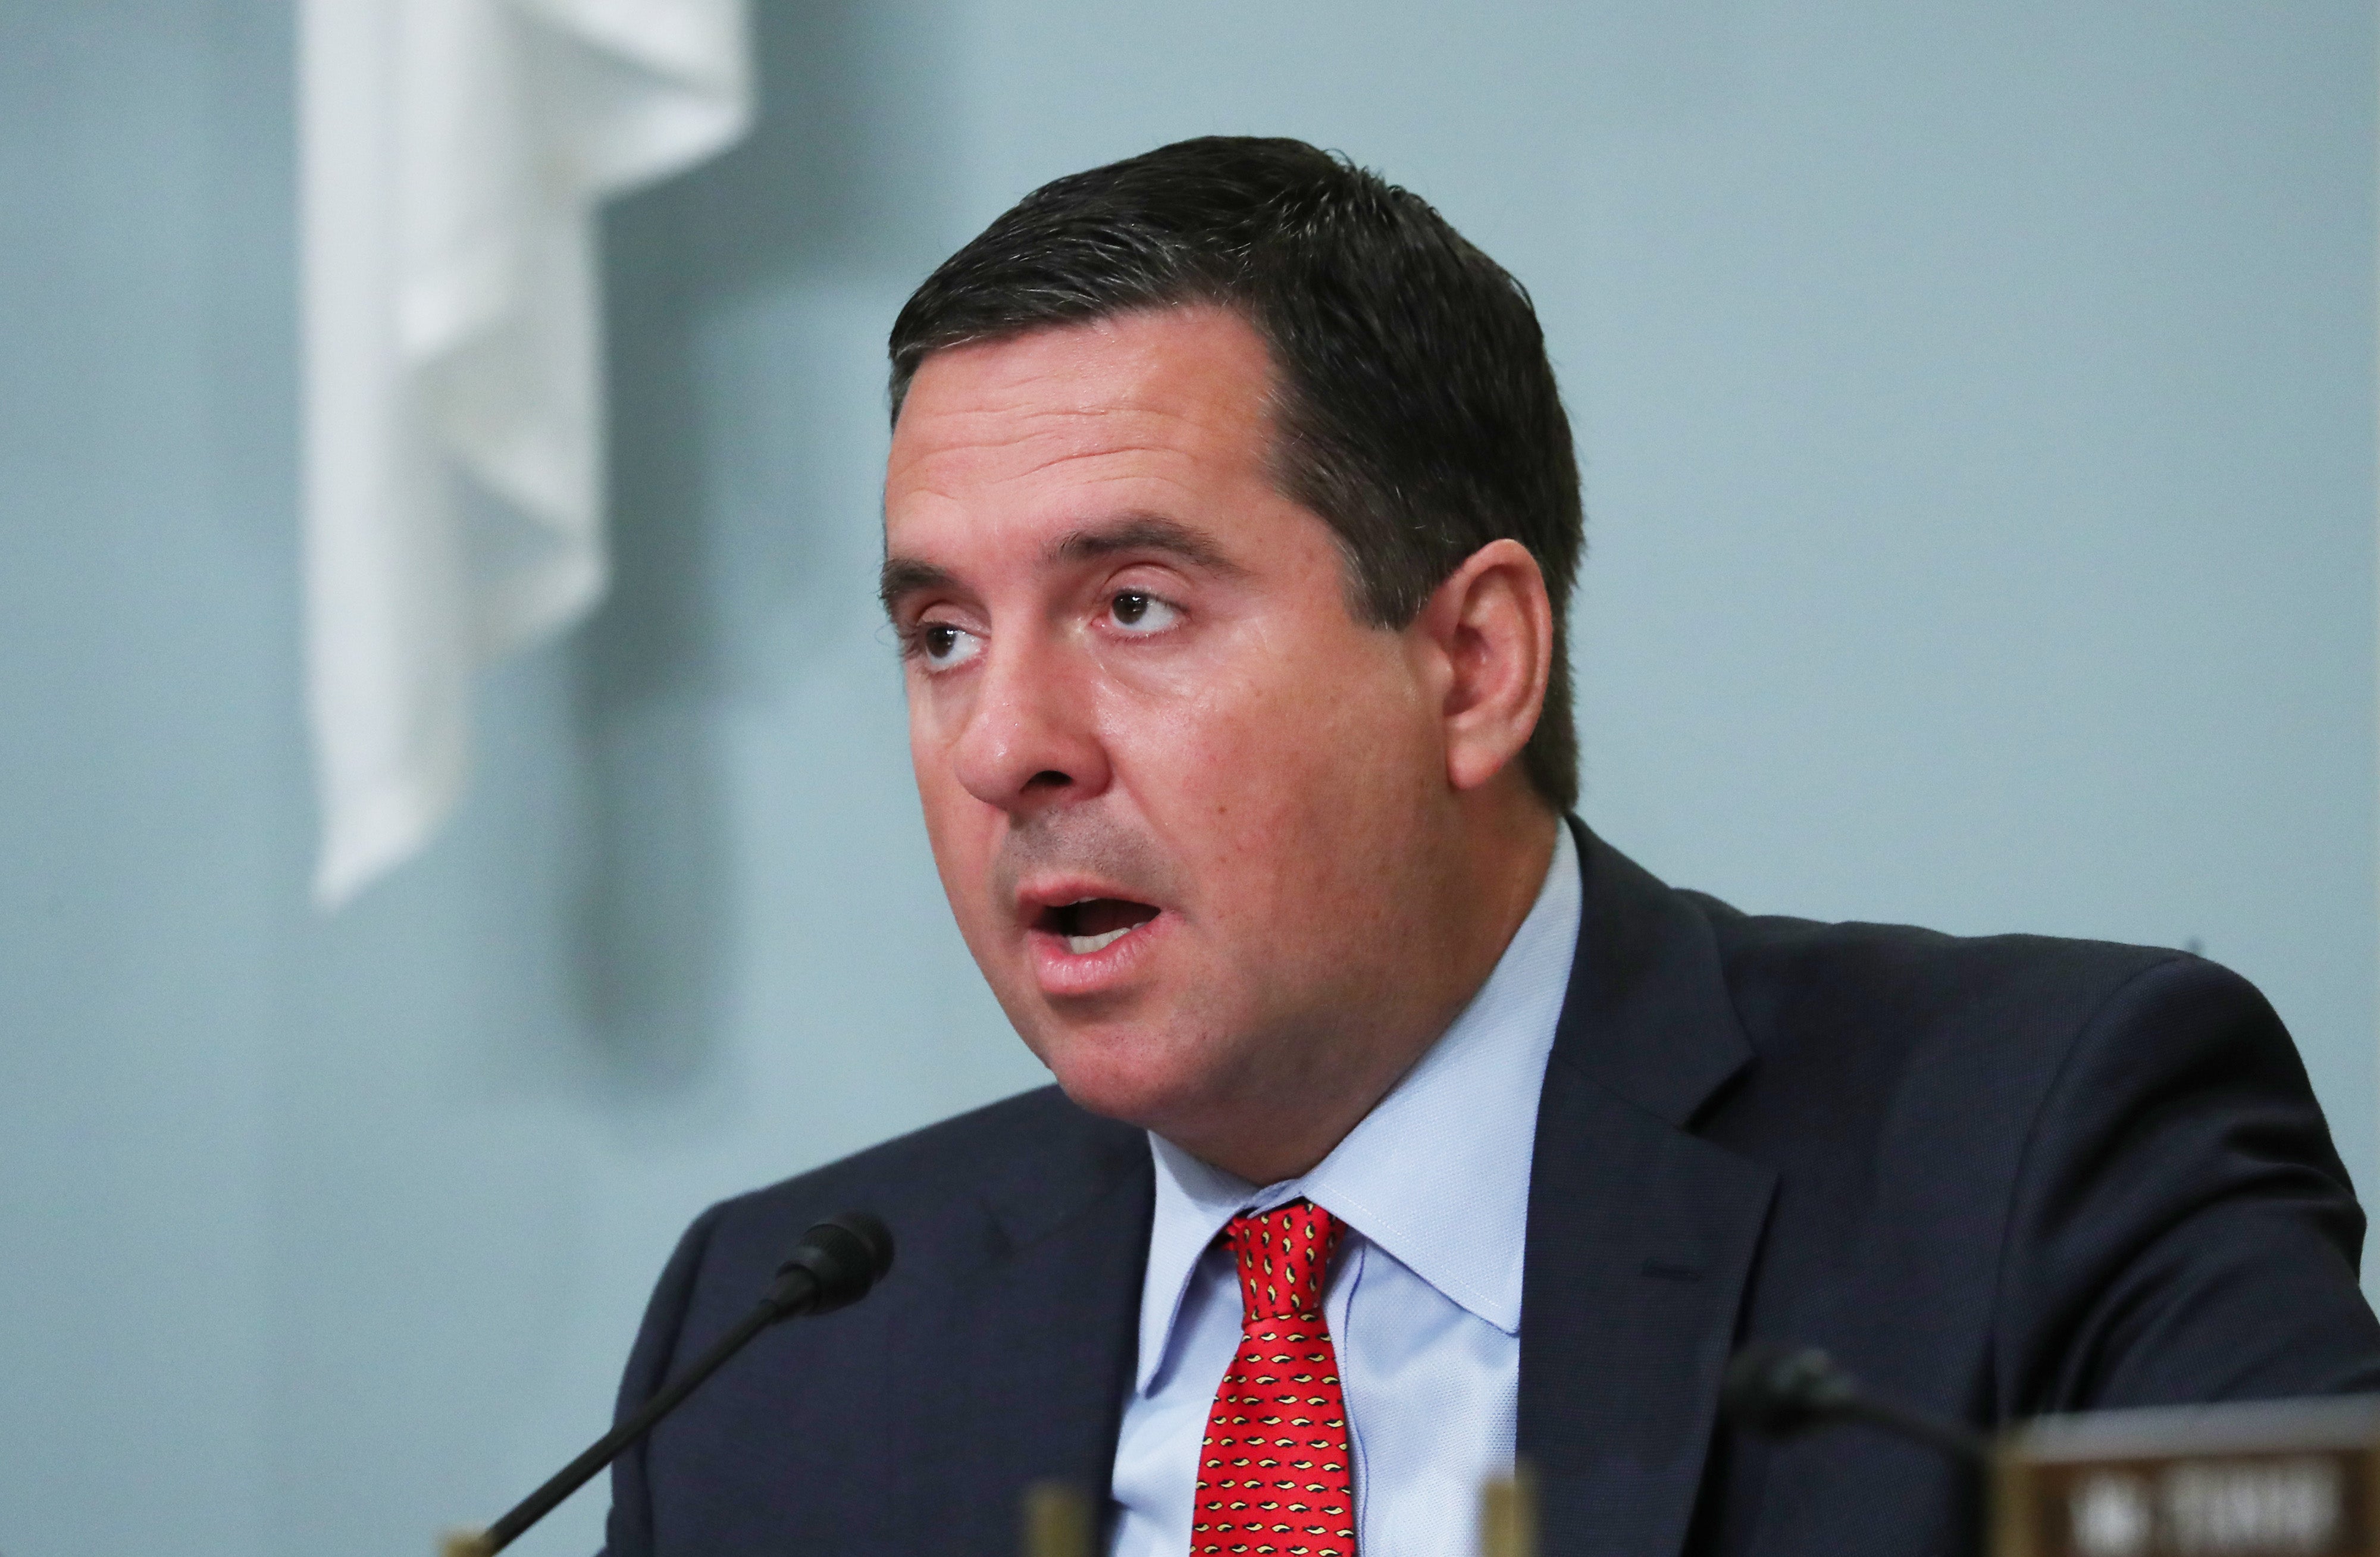 Devin Nunes is suing two fake Twitter accounts